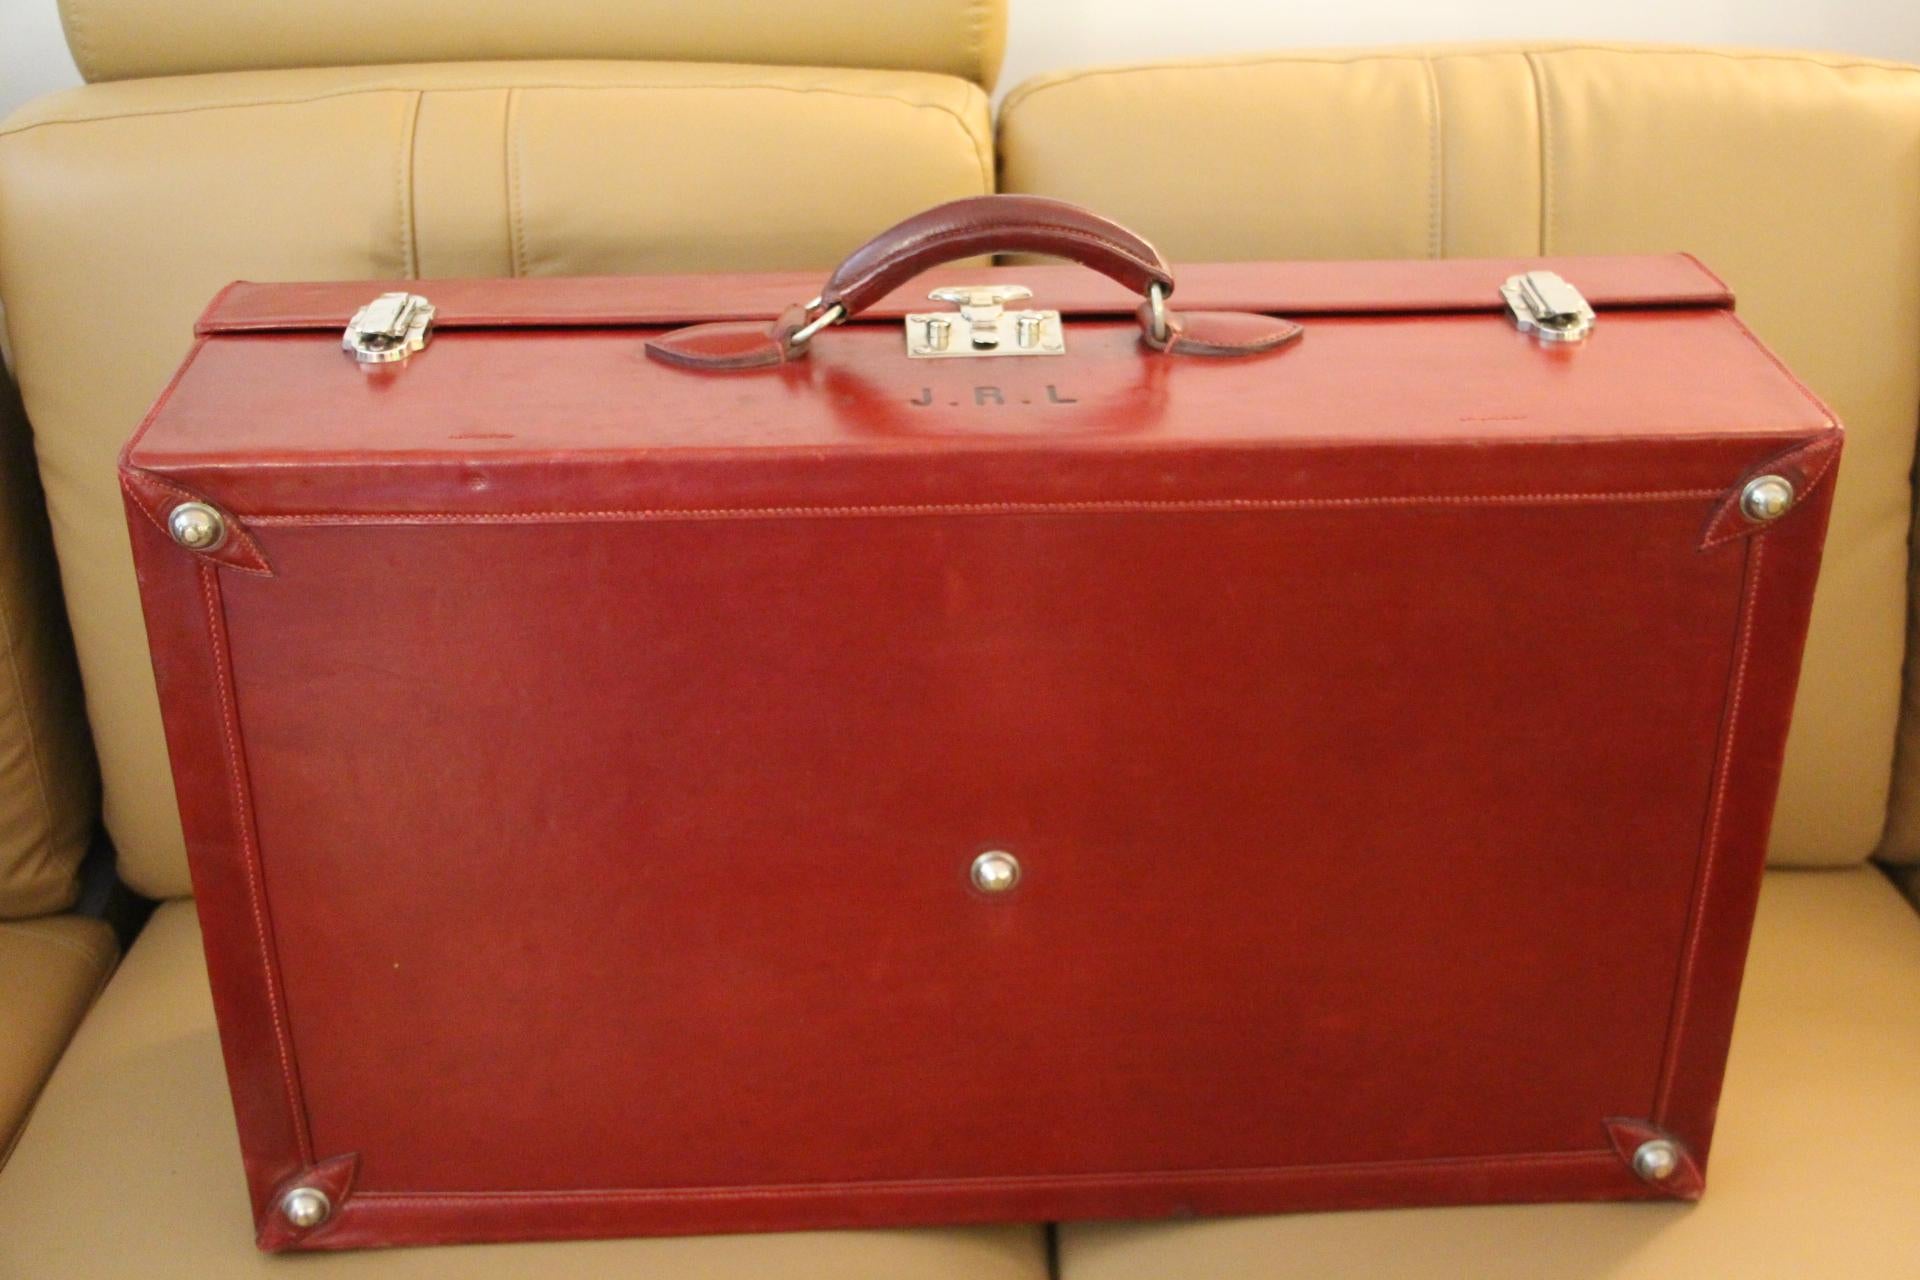 Women's or Men's Red Leather Hermes Suitcase 70 cm, Hermes Trunk, Hermes Luggage